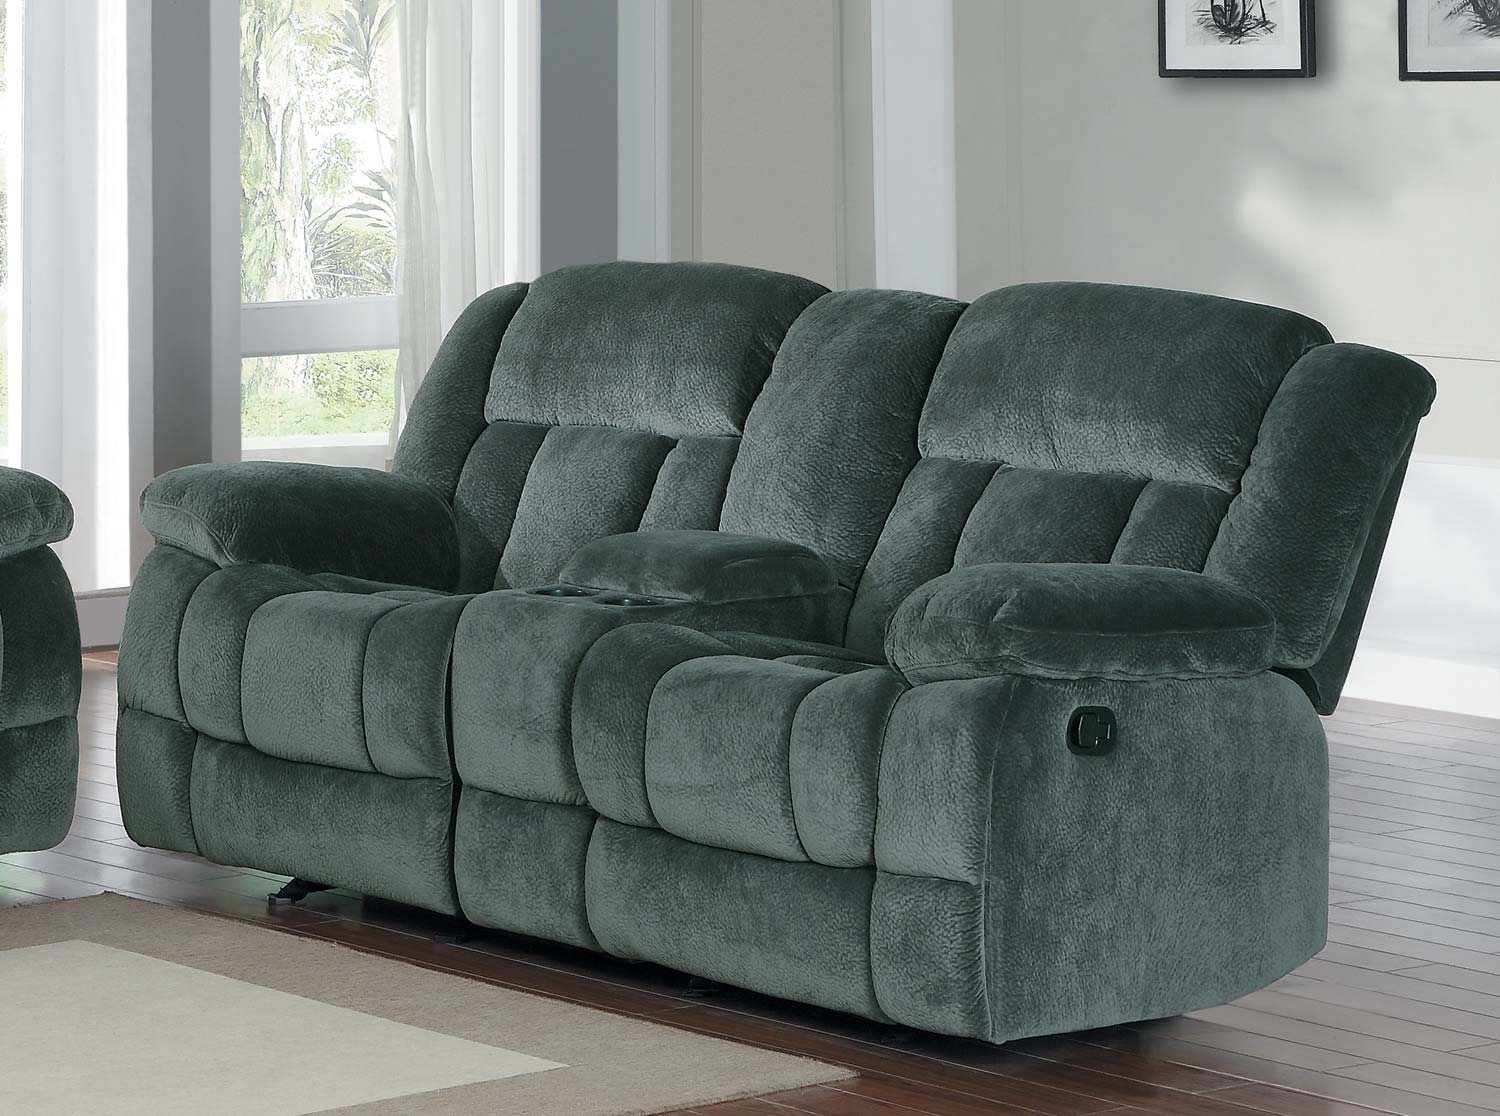 microfiber reclining loveseat with console homelegance laurelton double glider reclining love seat with center console UJOUPQY